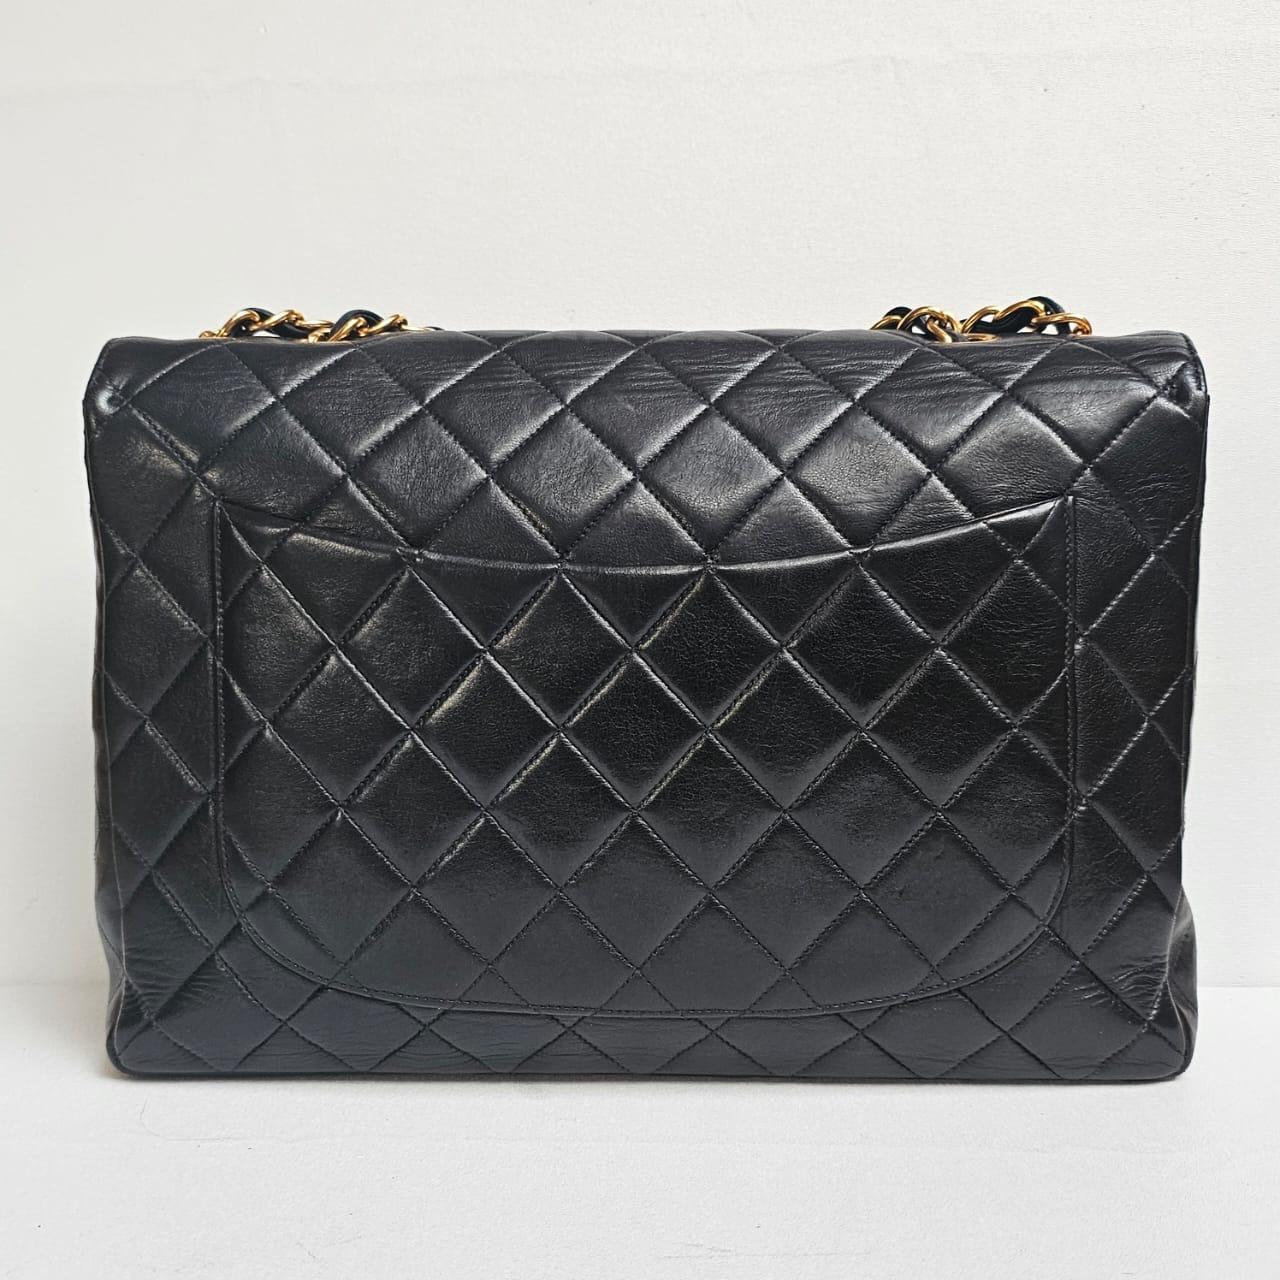 Classic Chanel Vintage Jumbo lambskin bag in black. Good vintage condition overall, with slight lost of structure and creases and scratches. Series #3. Comes with holo sticker and replacement chanel dust bag.